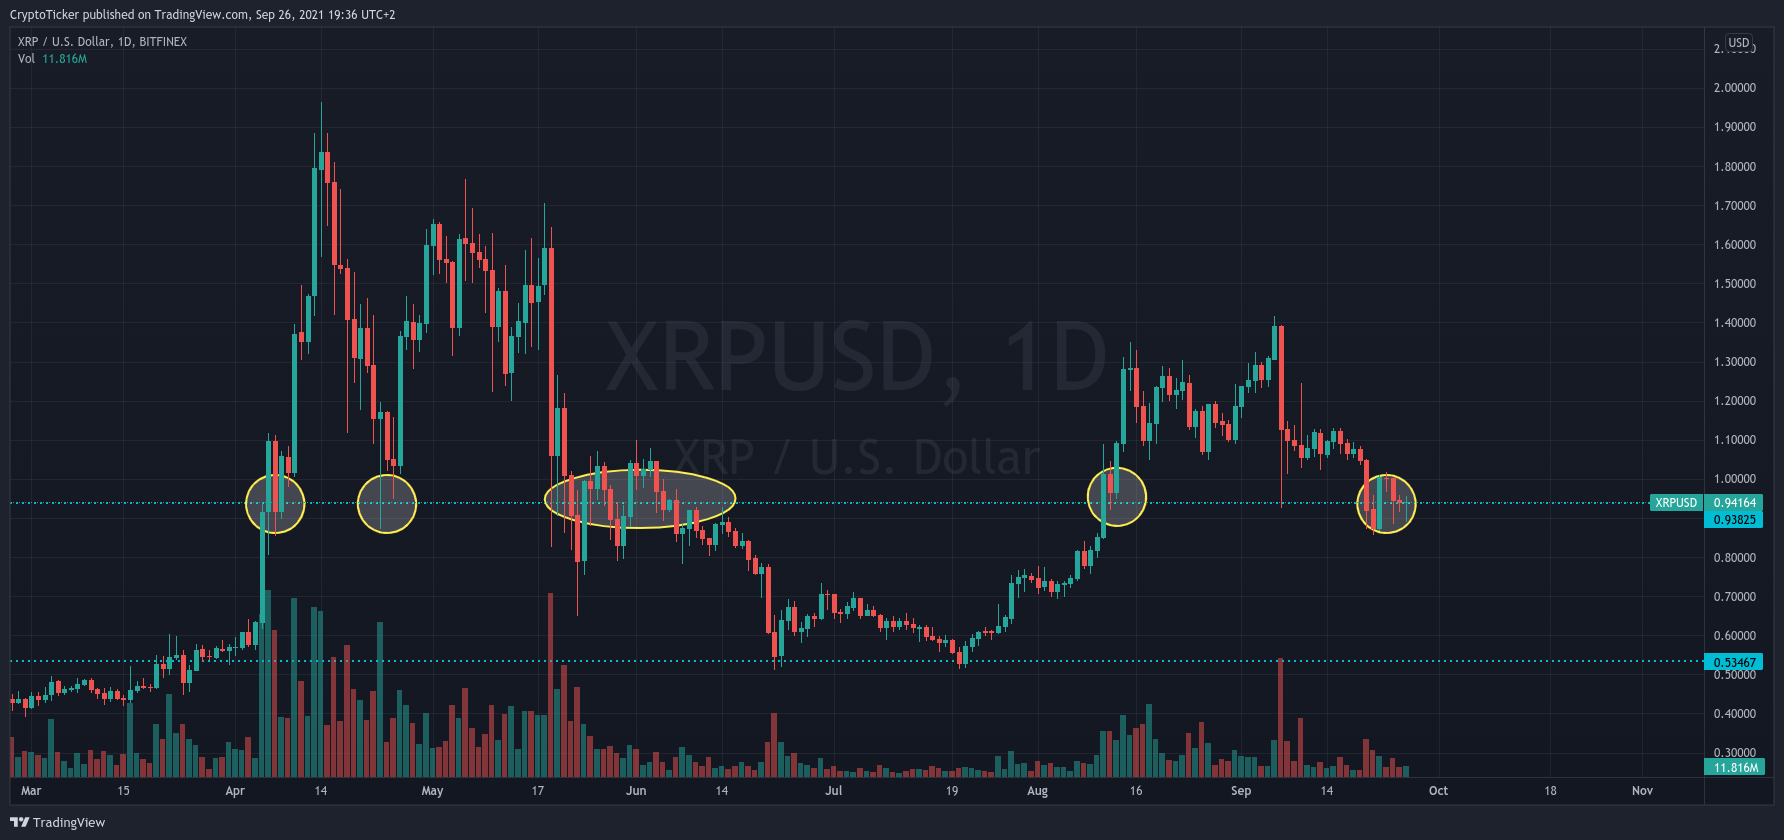 XRP/USD 1-day chart showing an important consolidation level